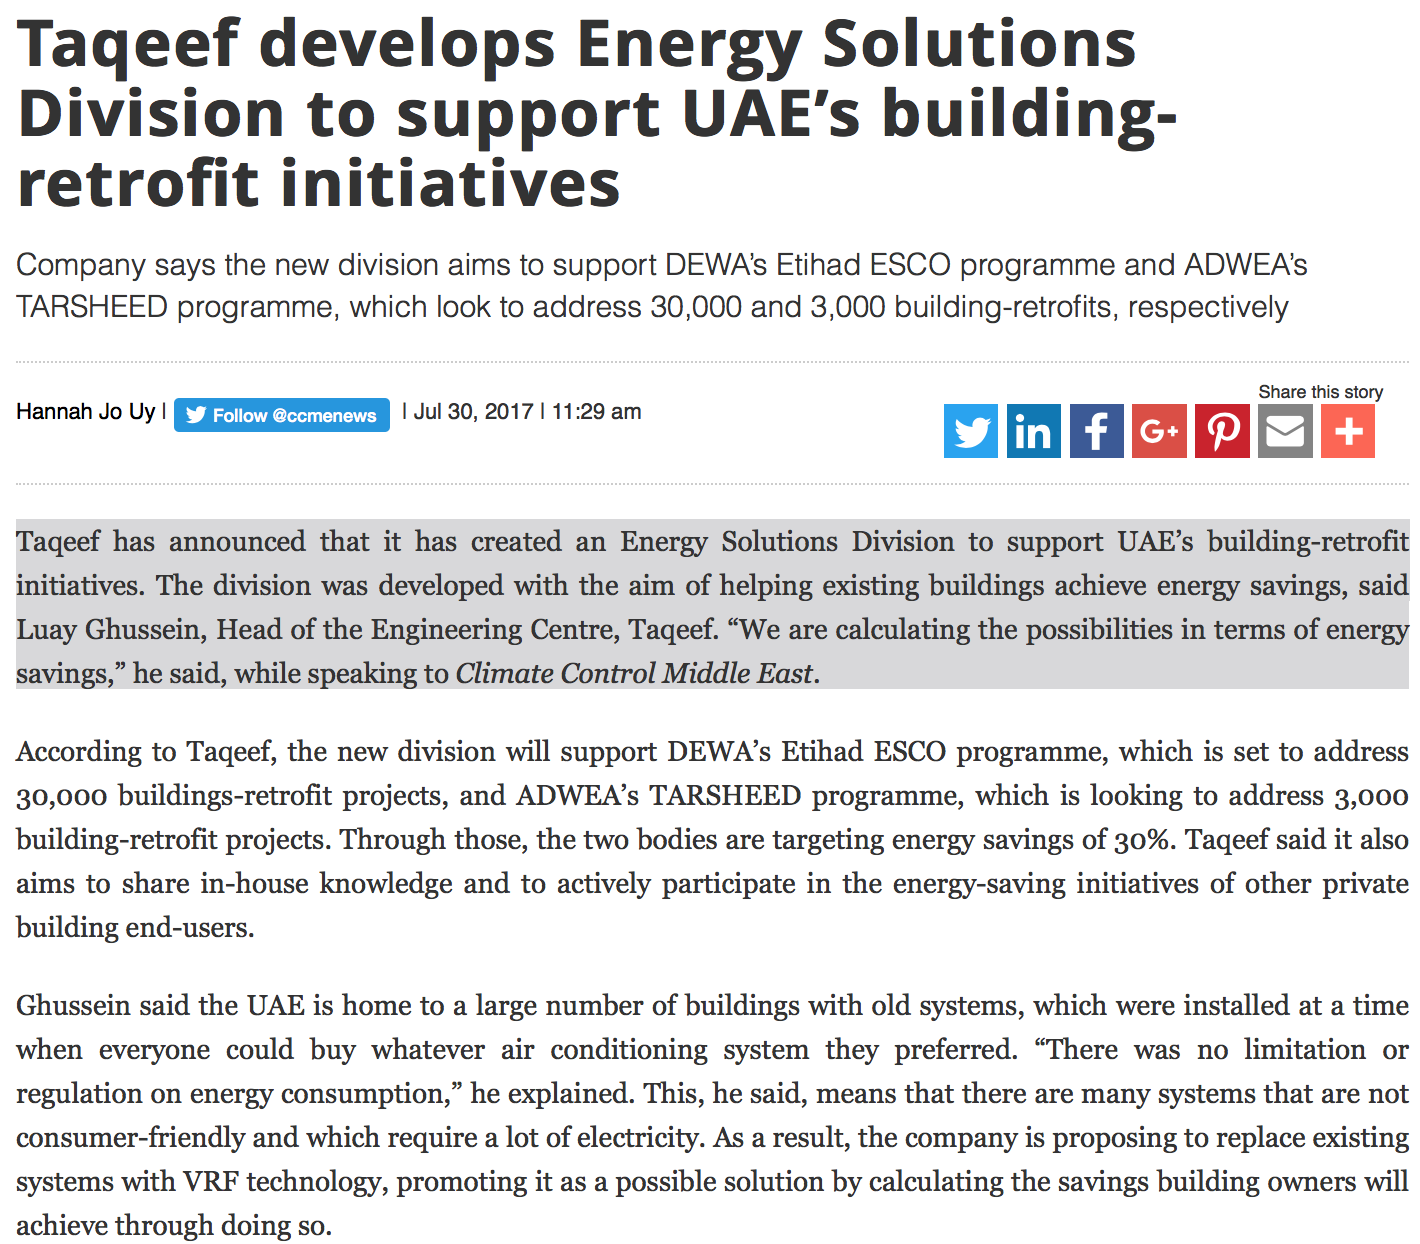 Taqeef develops Energy Solutions Division to support UAE’s building-retrofit initiatives